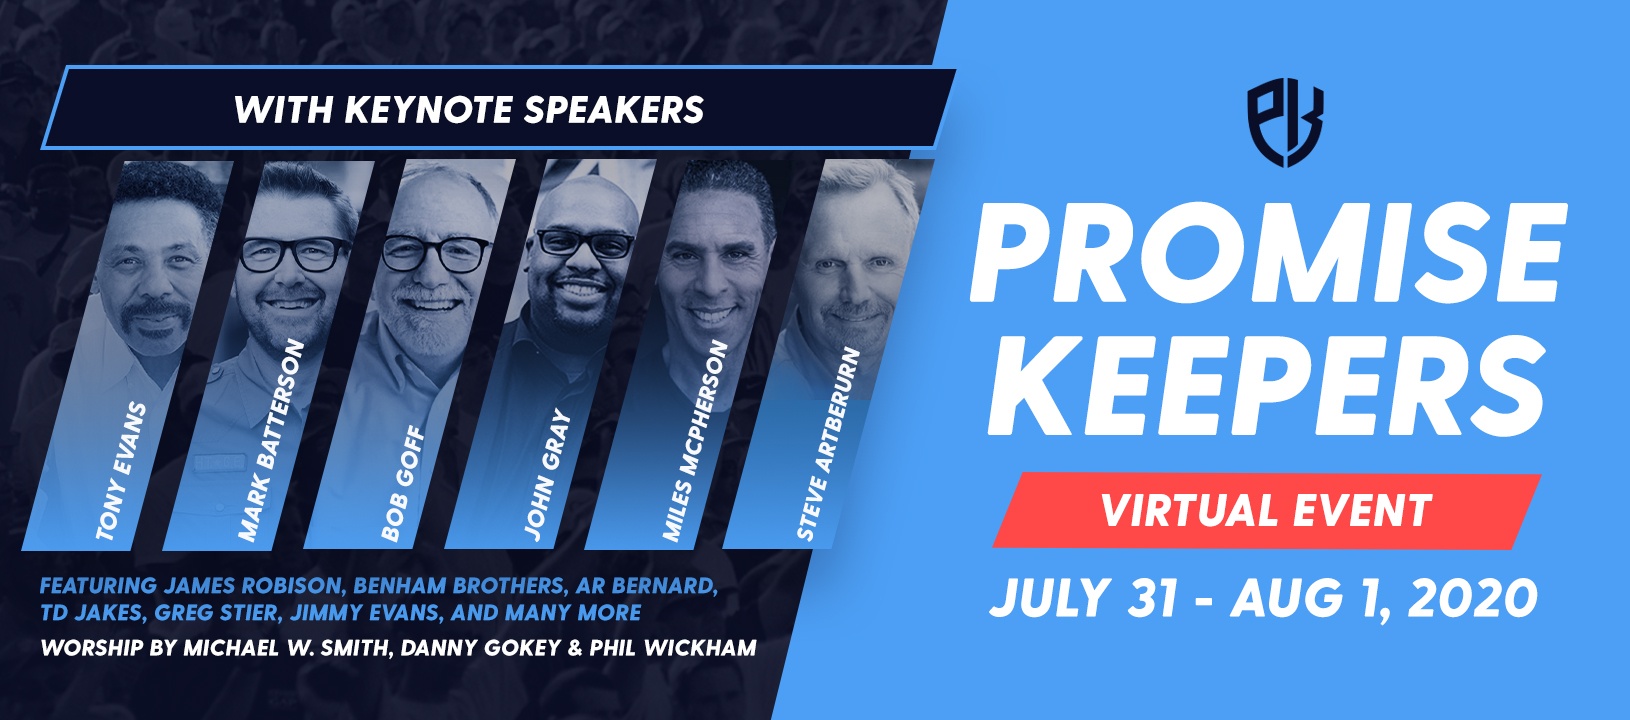 Promise Keepers virtual event July 31 - August 1, 2020